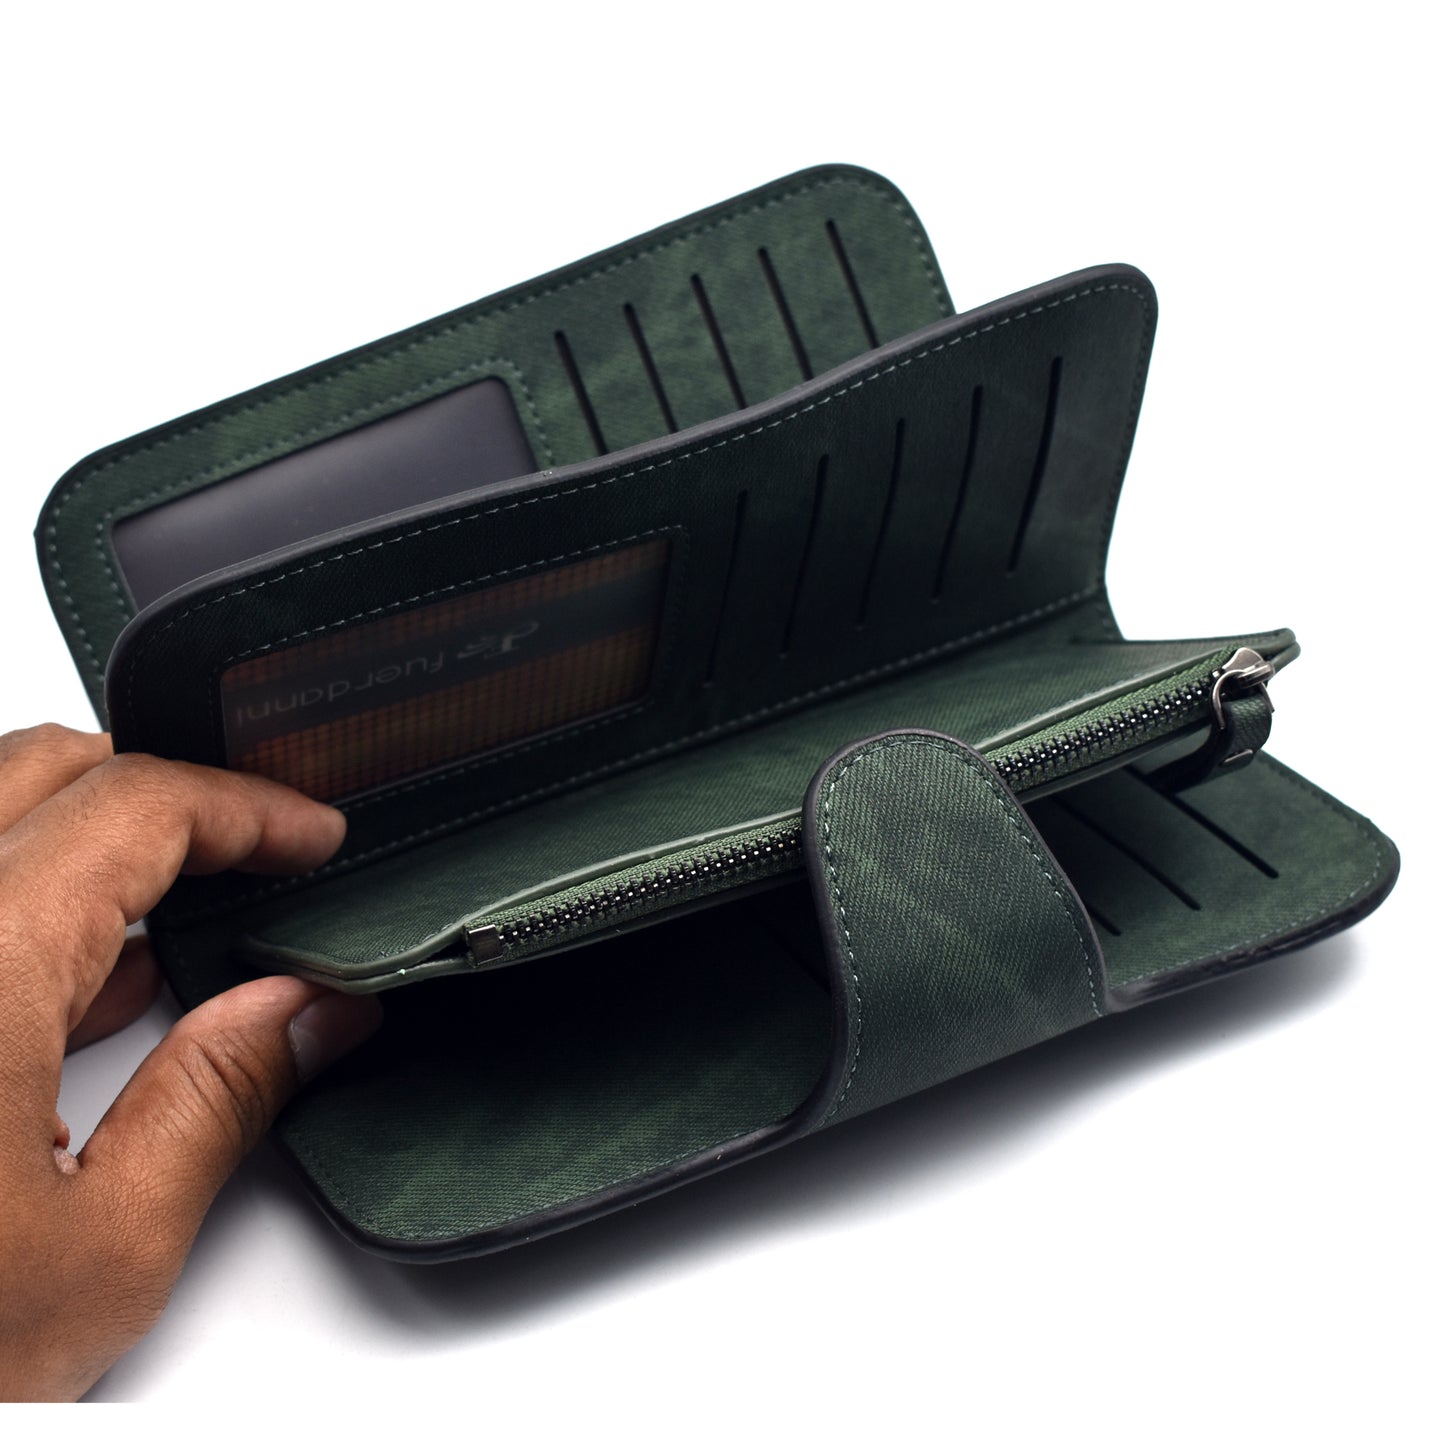 Fuerdanni Long Multi Purpose Wallet Imported from China - Fuerdanni 05